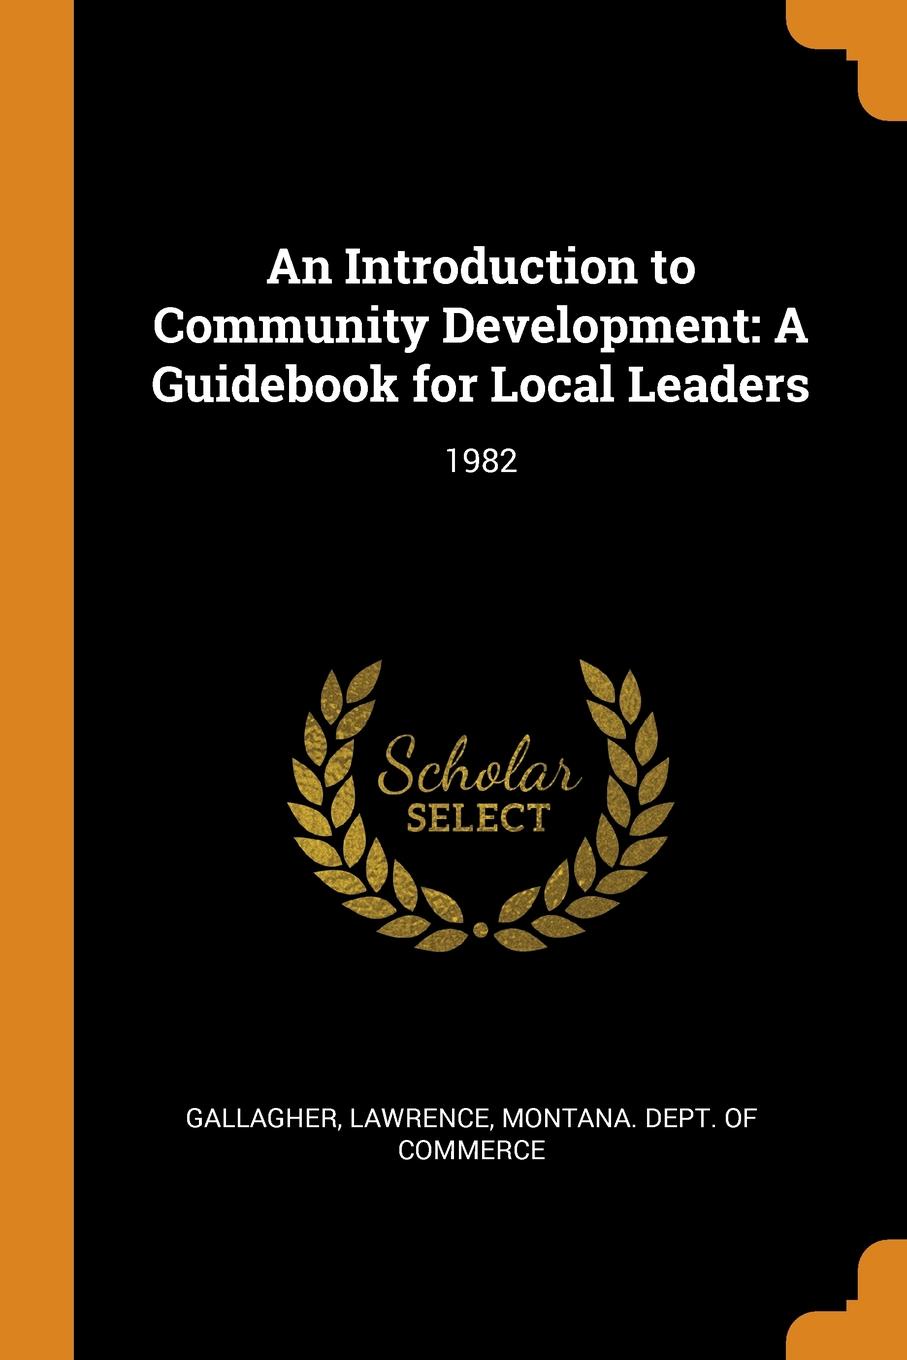 An Introduction to Community Development. A Guidebook for Local Leaders: 1982